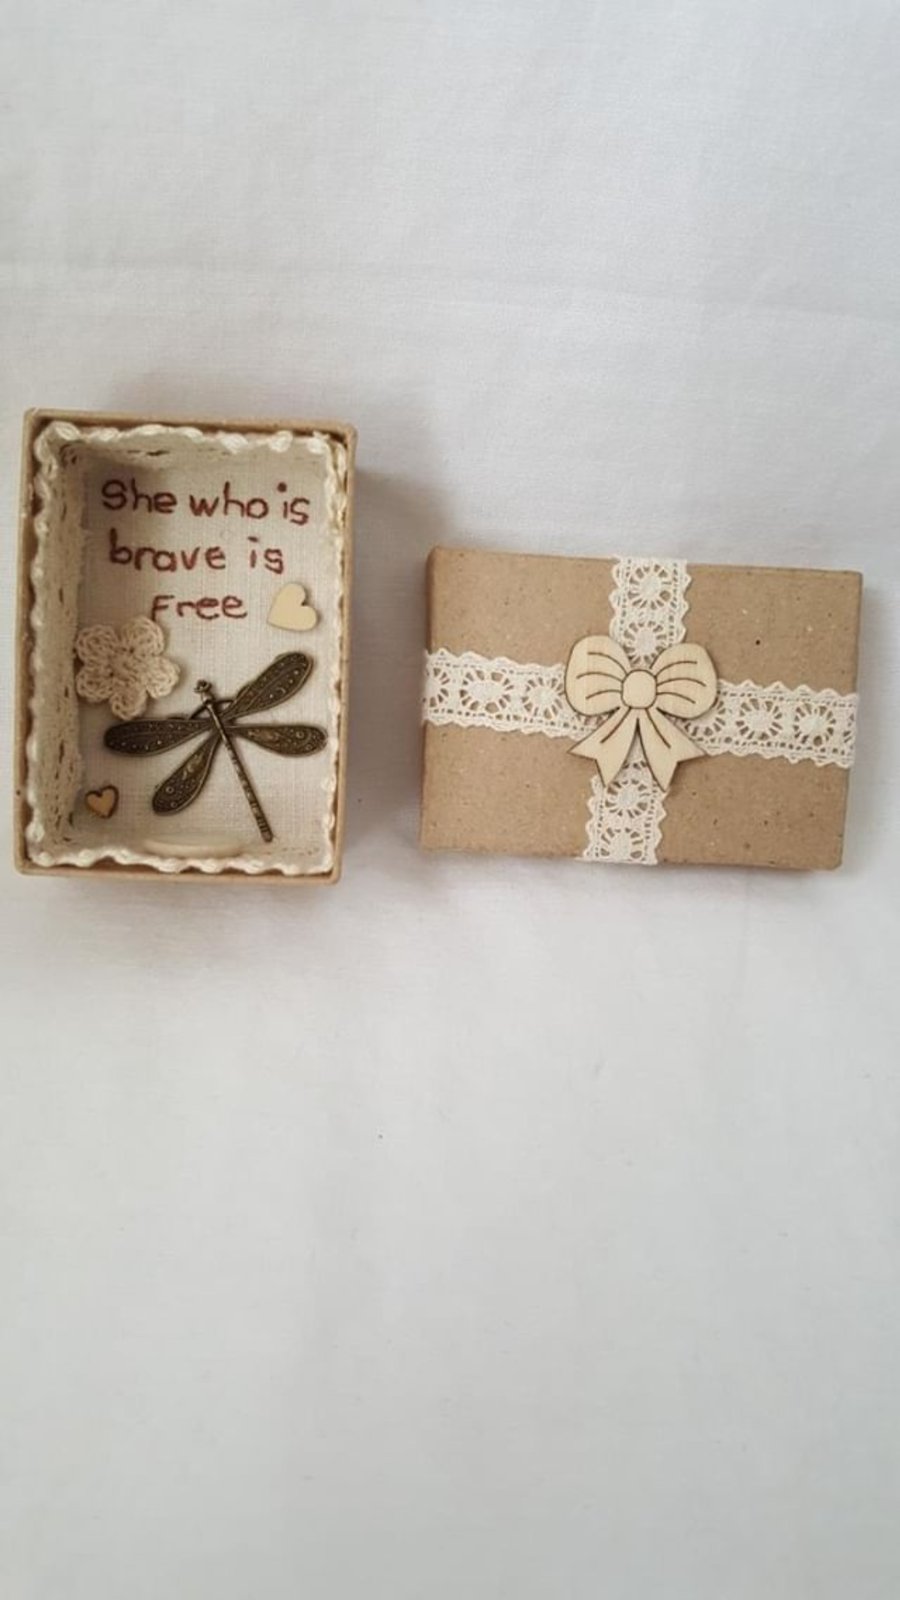 small miniature art diorama with a message 'she who is brave is free'